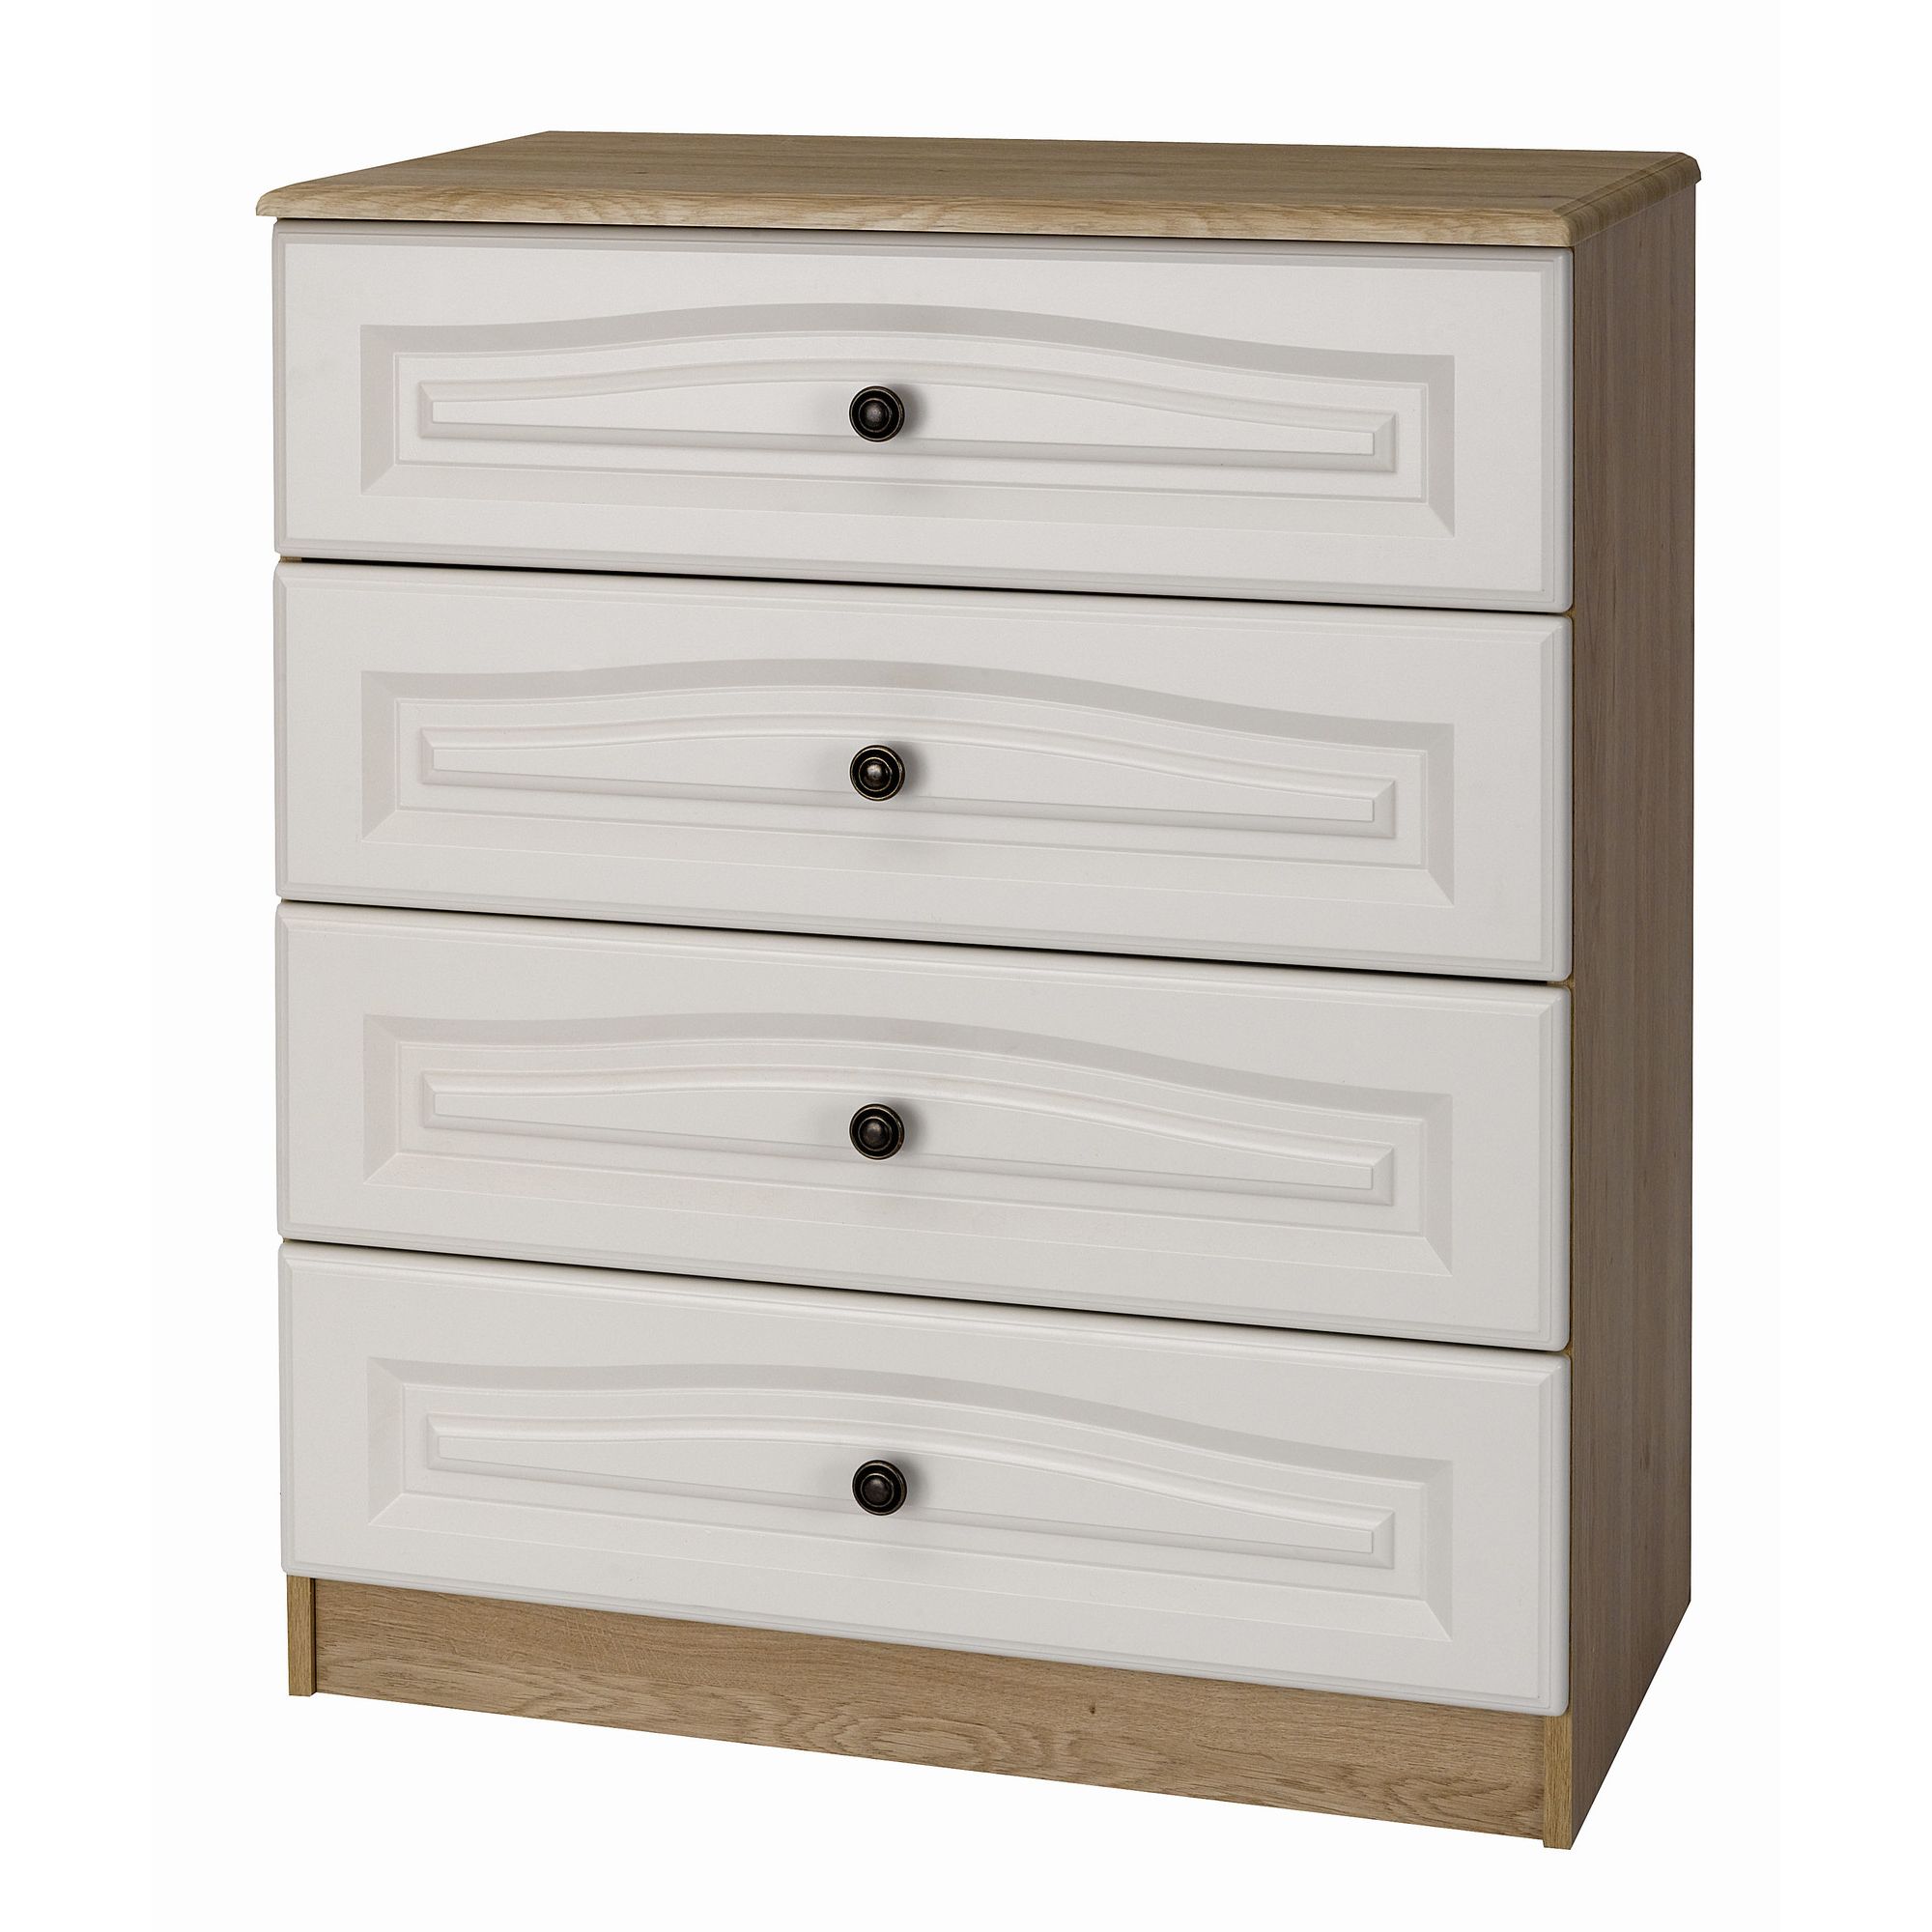 Alto Furniture Visualise Bordeaux Four Drawer Chest in Oak with Light Front at Tesco Direct